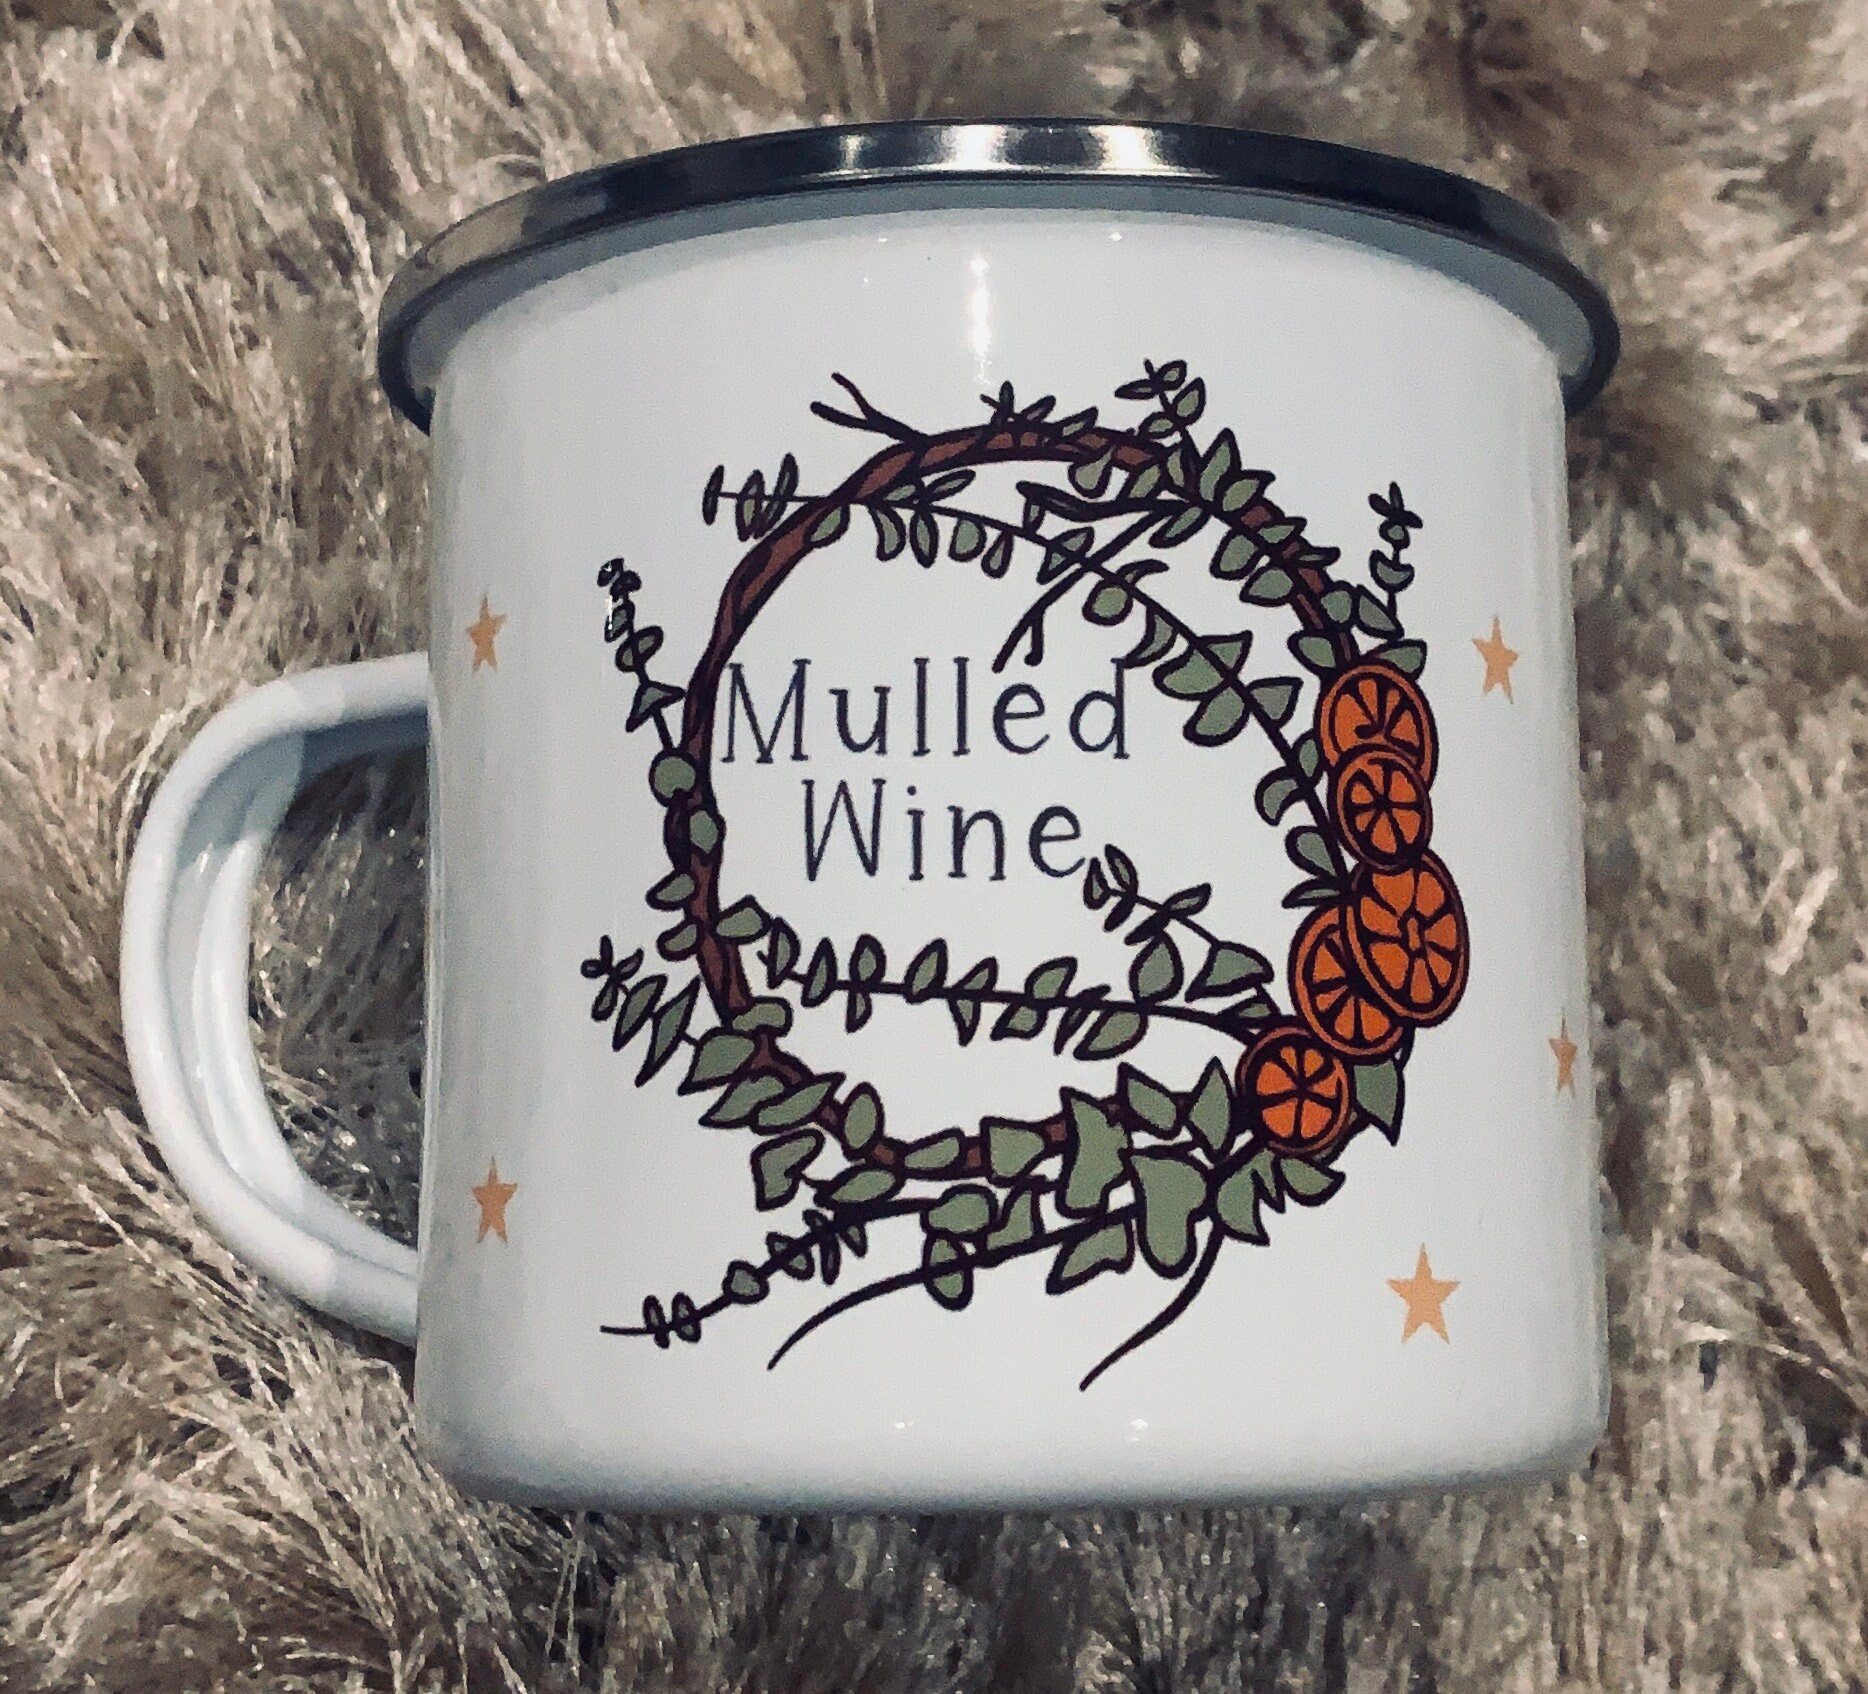 Wrenbury Mulled Wine glasses Set of 4 - Insulated Hot Toddy Mug 5 oz -  Double Wall clear Heat controlled Mug - Expresso coffee cup - Snow